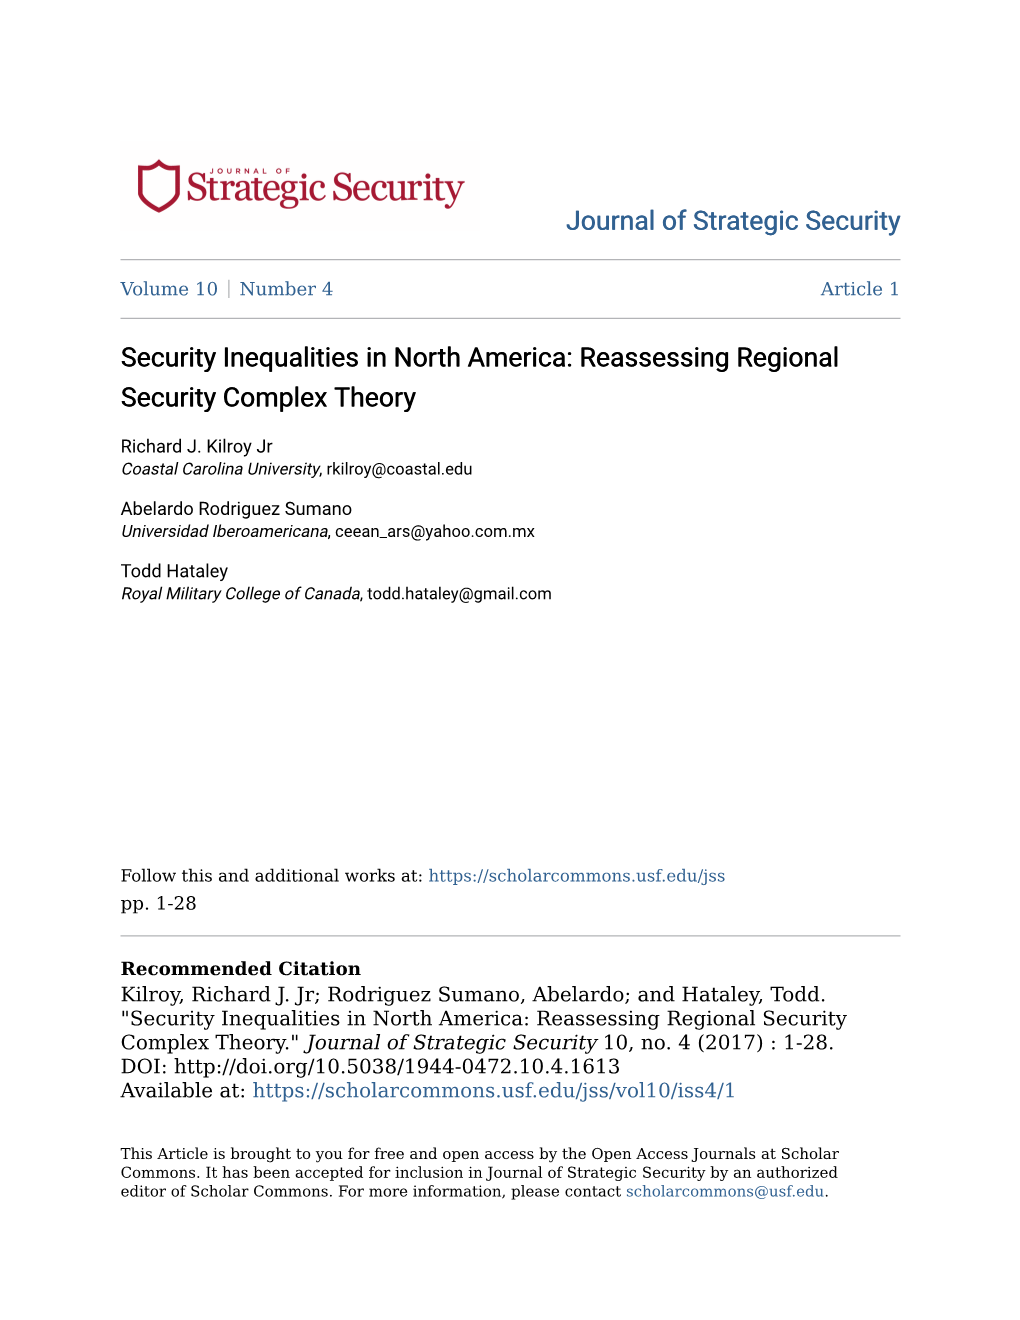 Reassessing Regional Security Complex Theory